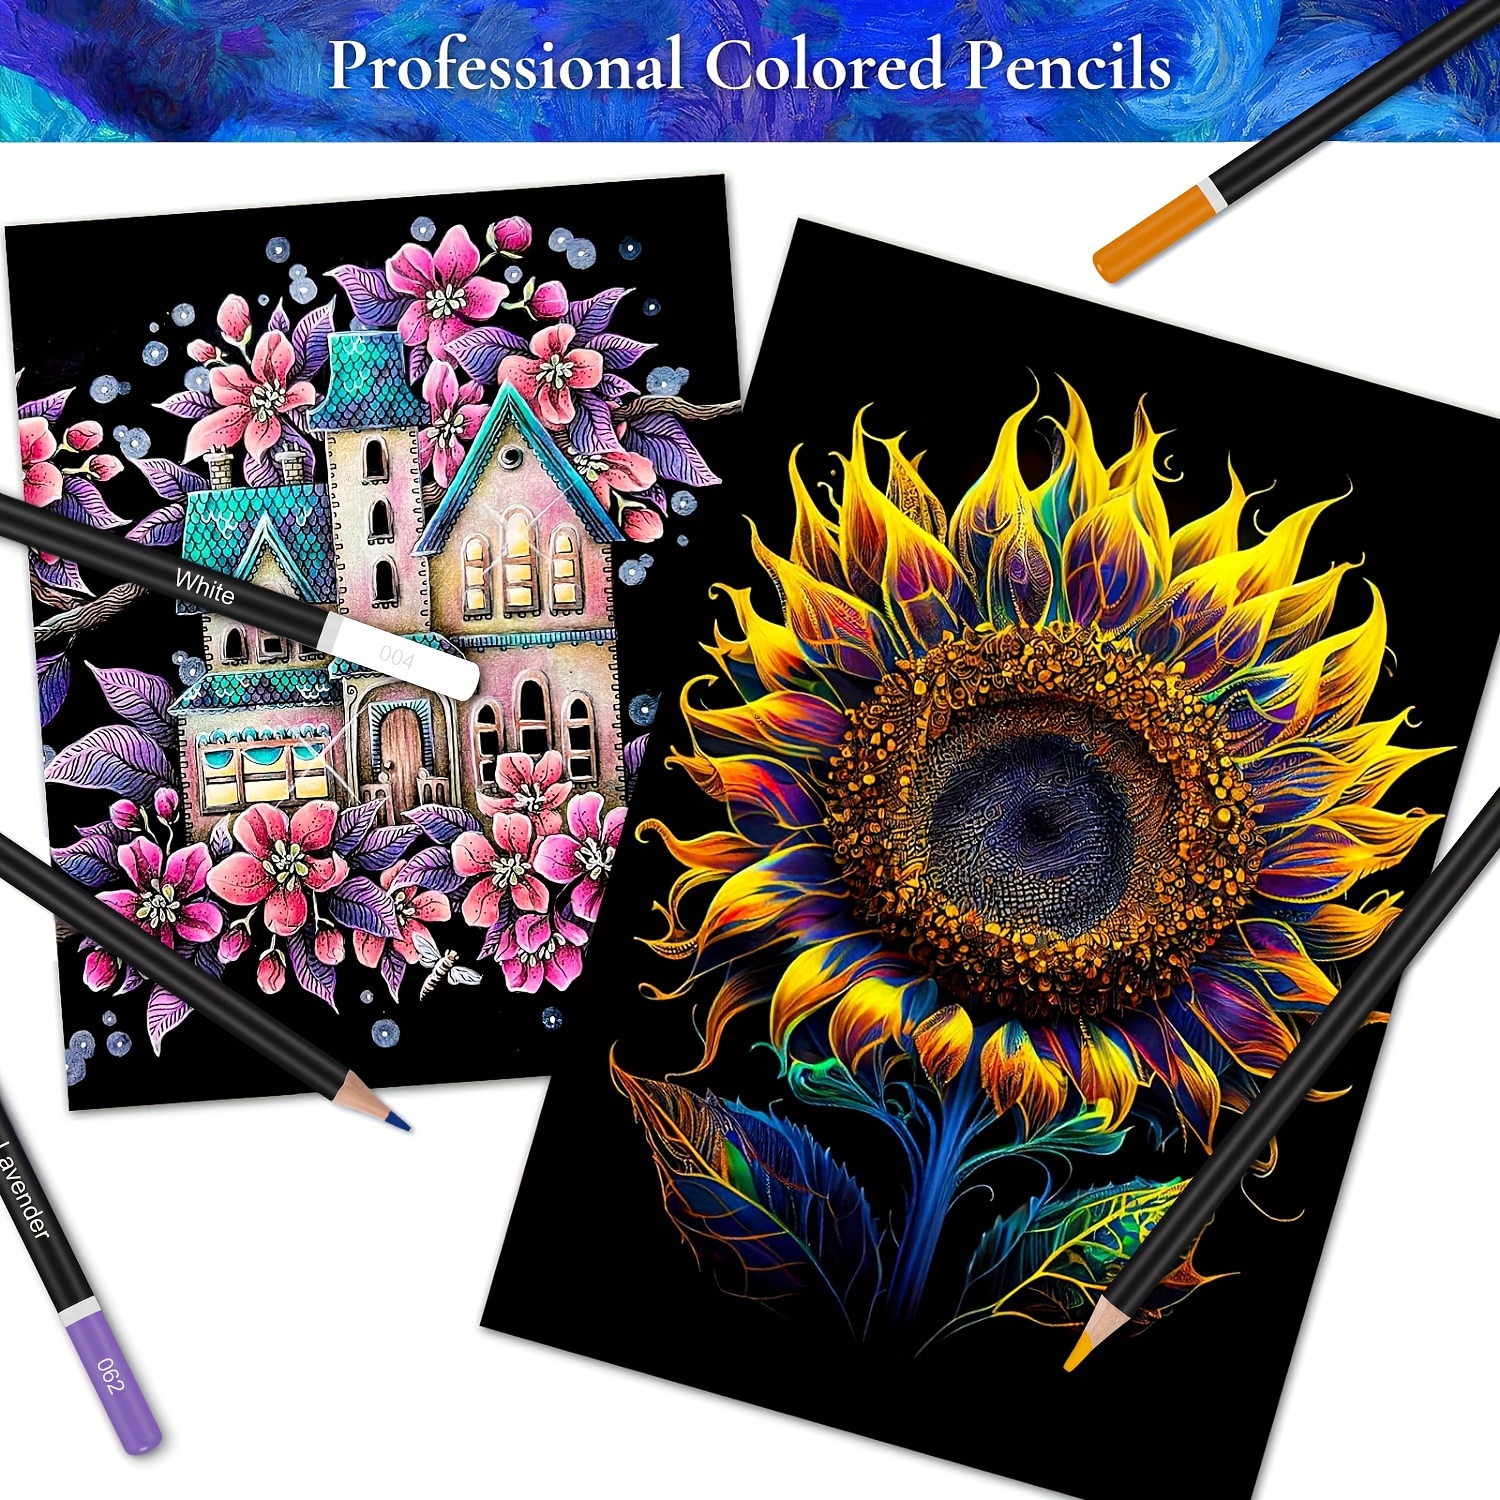 Art-n-Fly 72 Professional Oil Based Colored Pencils for Artist in Metal Case - Great for Blending and Layering